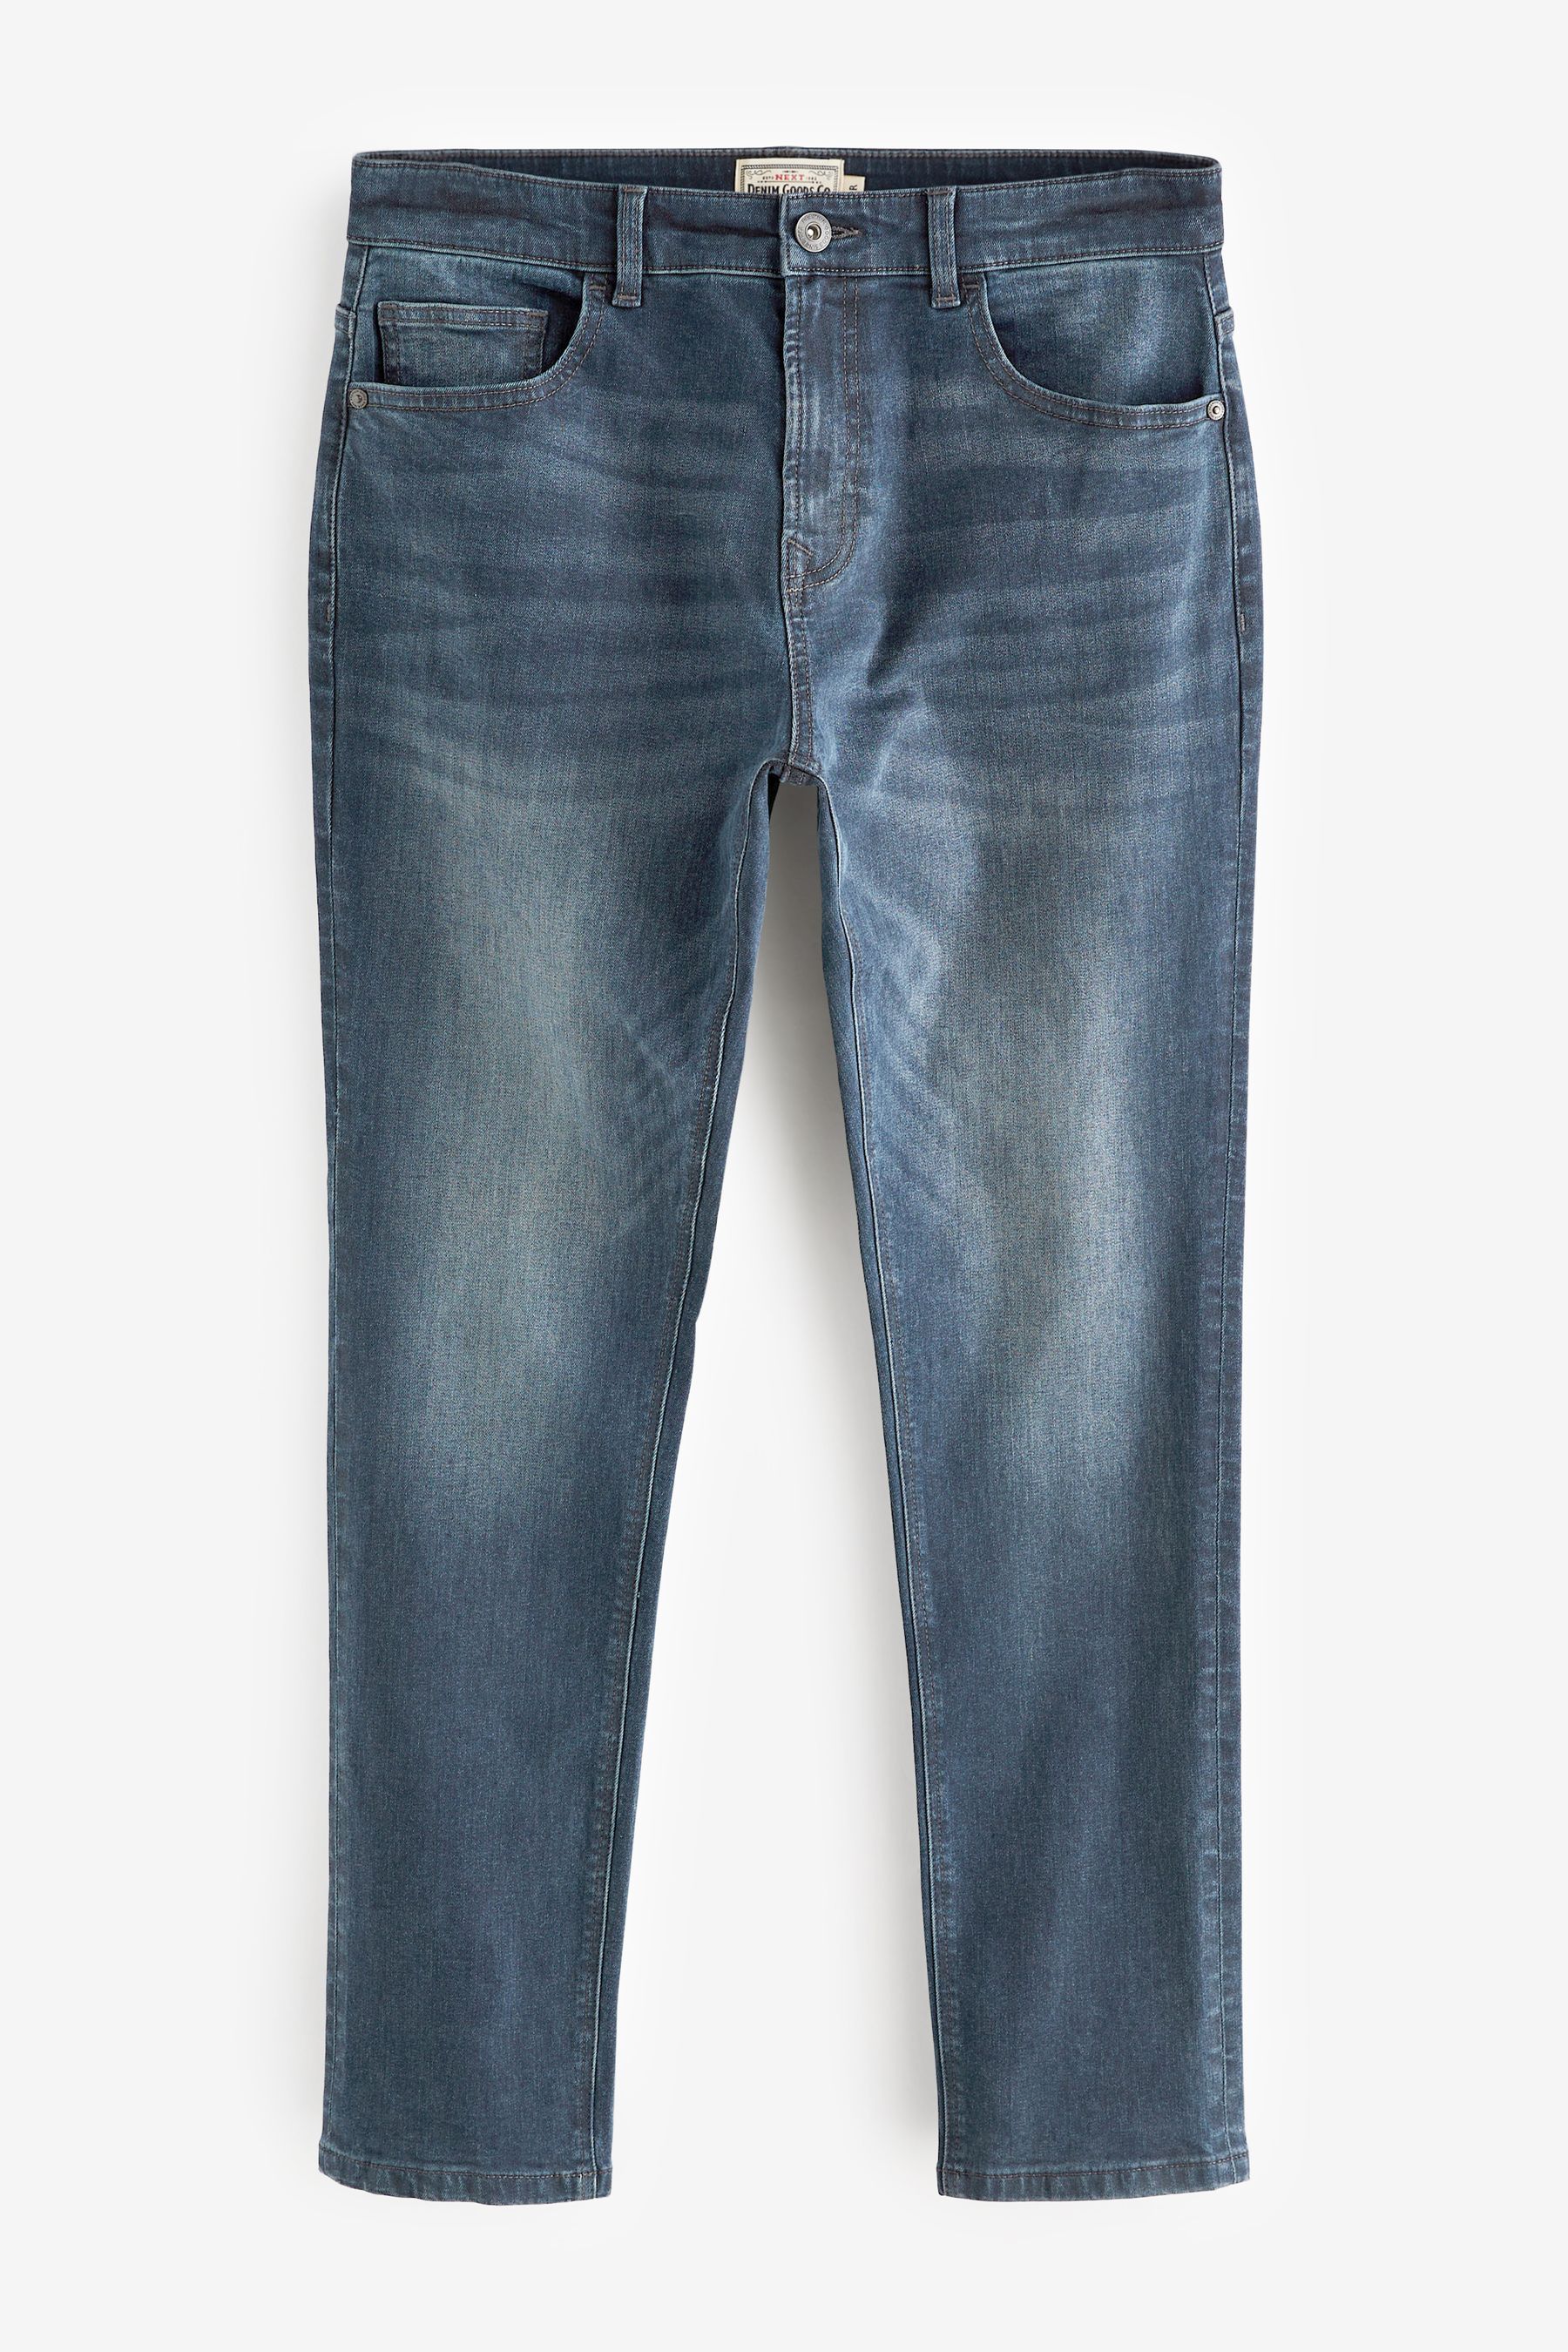 Buy Smoky Navy Skinny Classic Stretch Jeans from the Next UK online shop